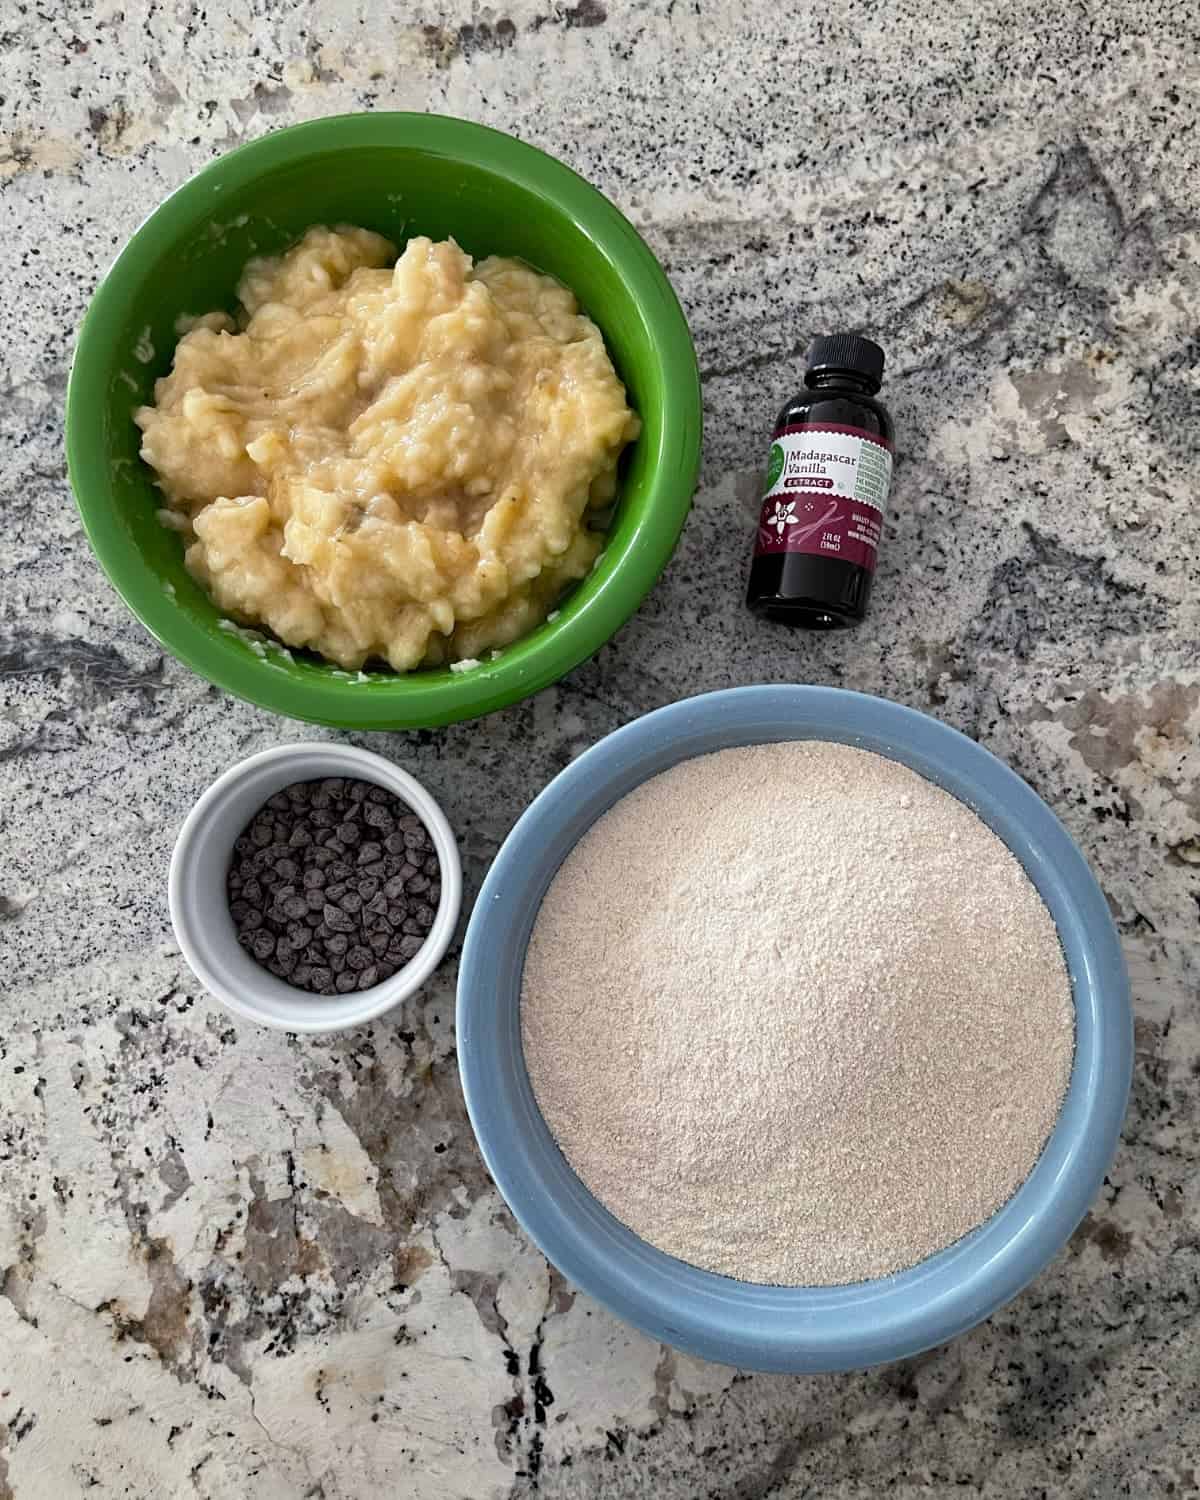 Ingredients including mashed banana in green bowl, Kodiak Cakes flapjack mix in blue bowl, vanilla extract and miniature chocolate chips on granite.